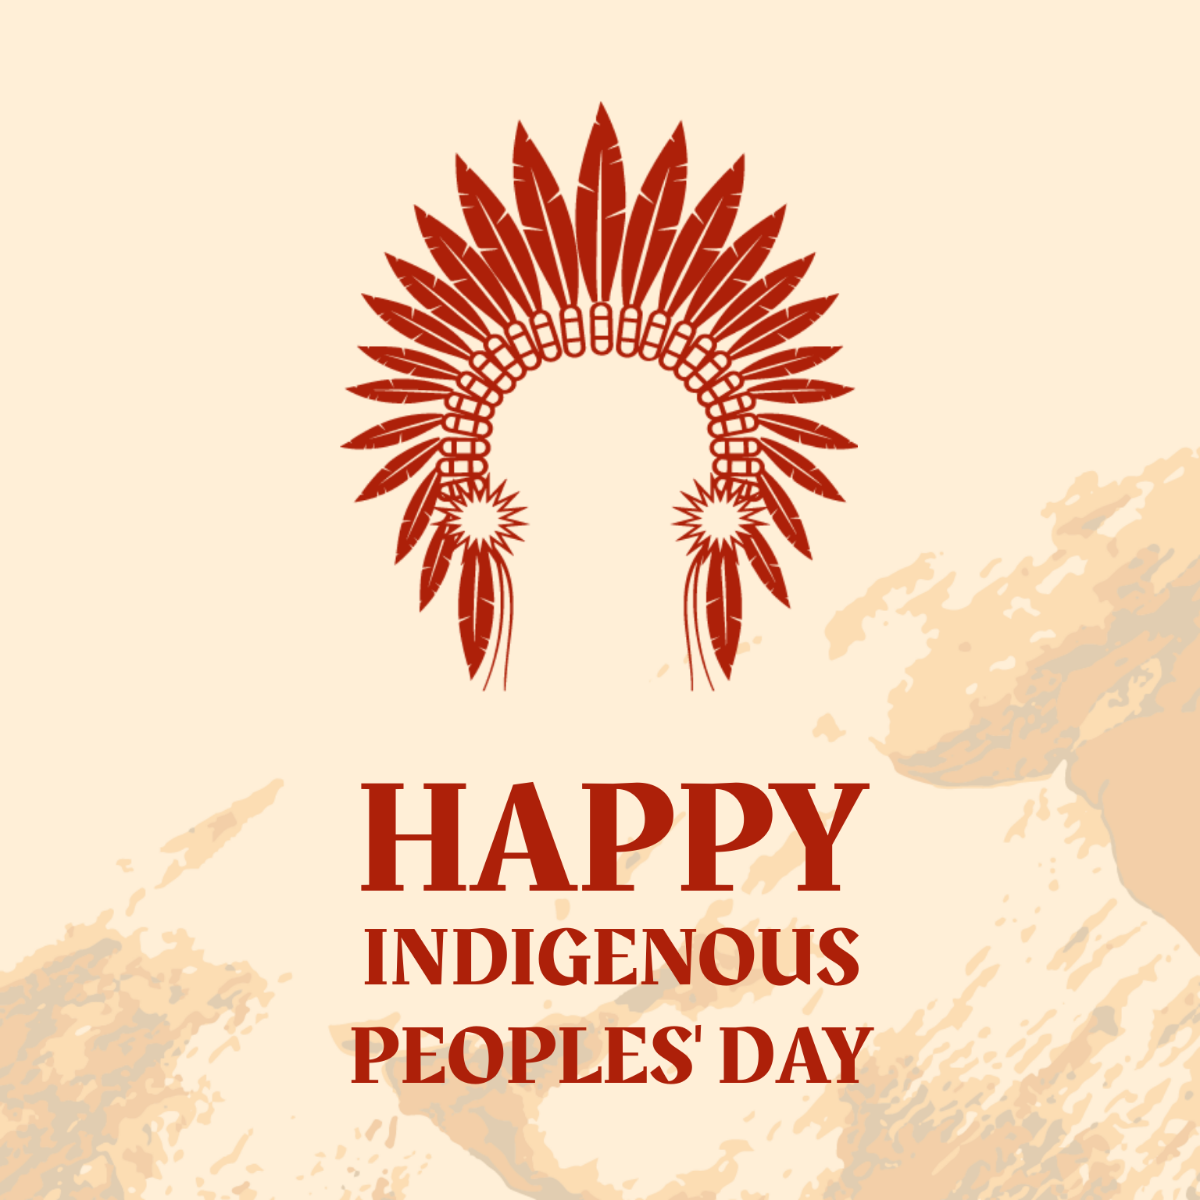 Free Indigenous Peoples' Day Vector Template